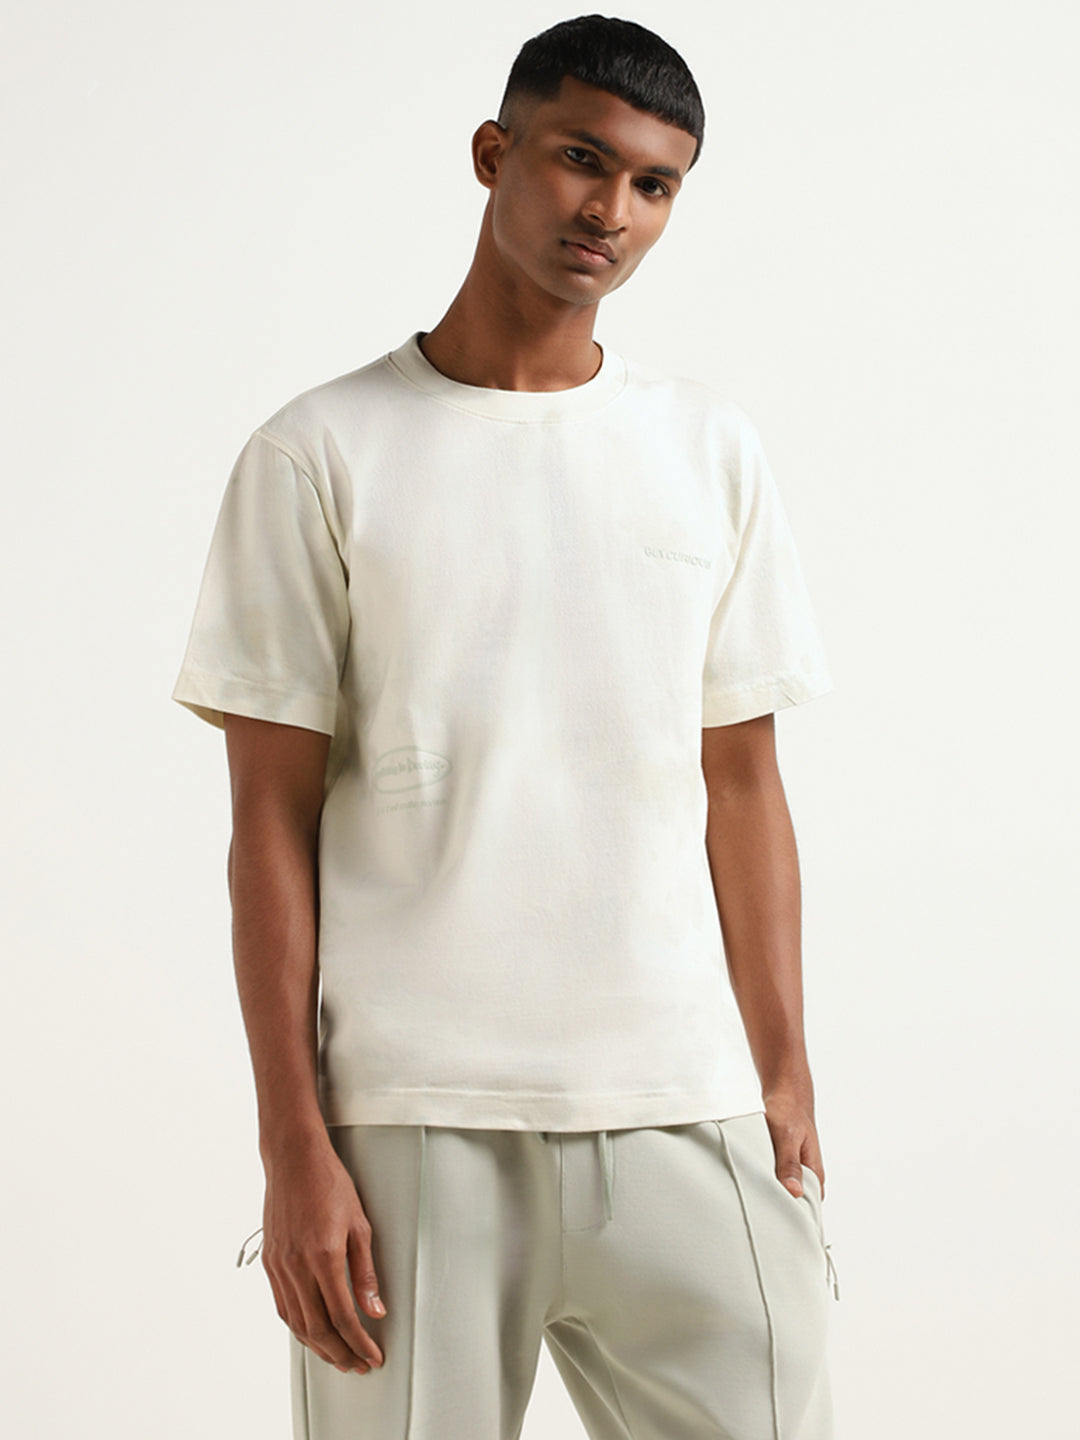 Studiofit Off-White Printed Cotton Relaxed-Fit T-Shirt